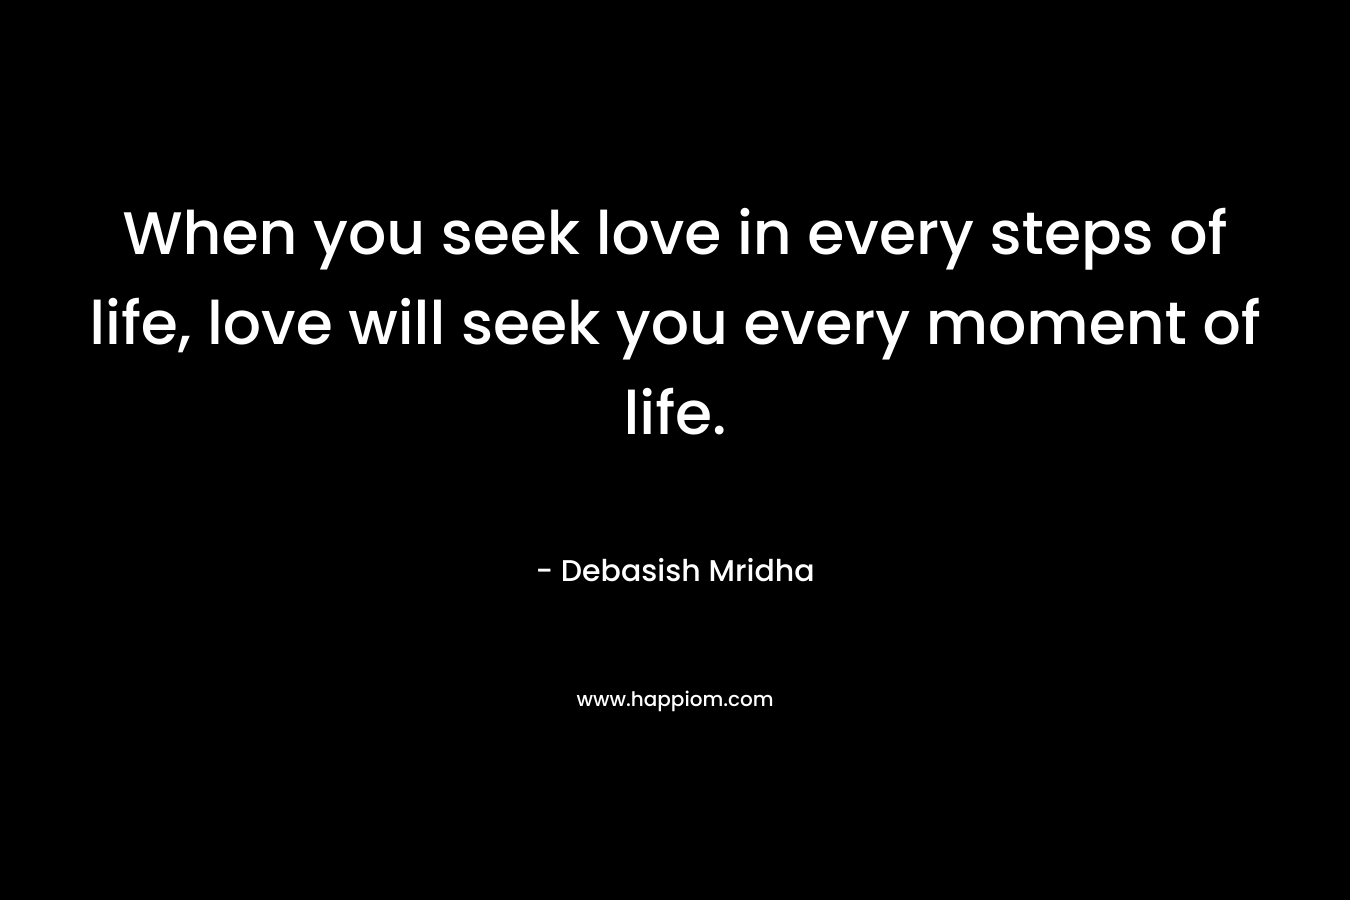 When you seek love in every steps of life, love will seek you every moment of life.